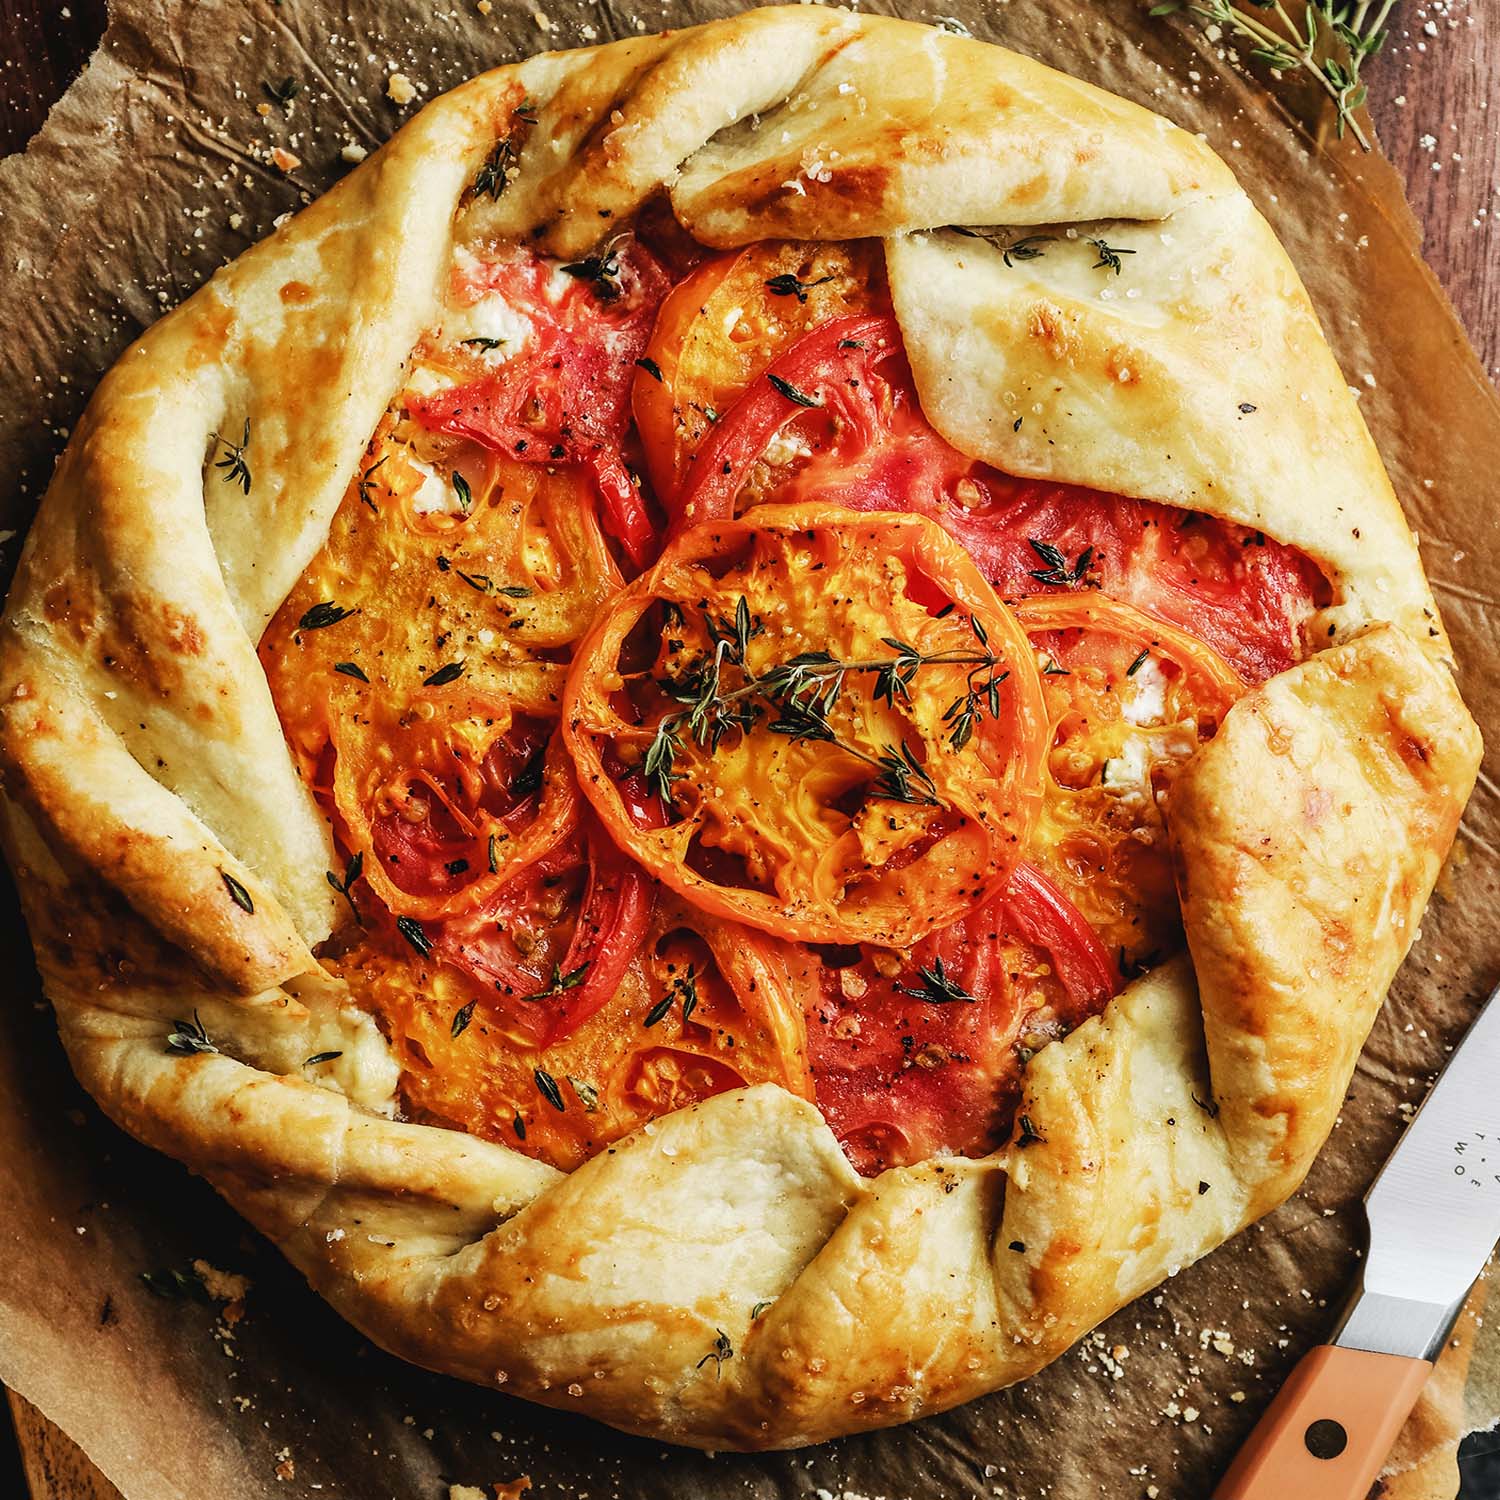 Pizza Thyme: The Best Herb for Italian Night